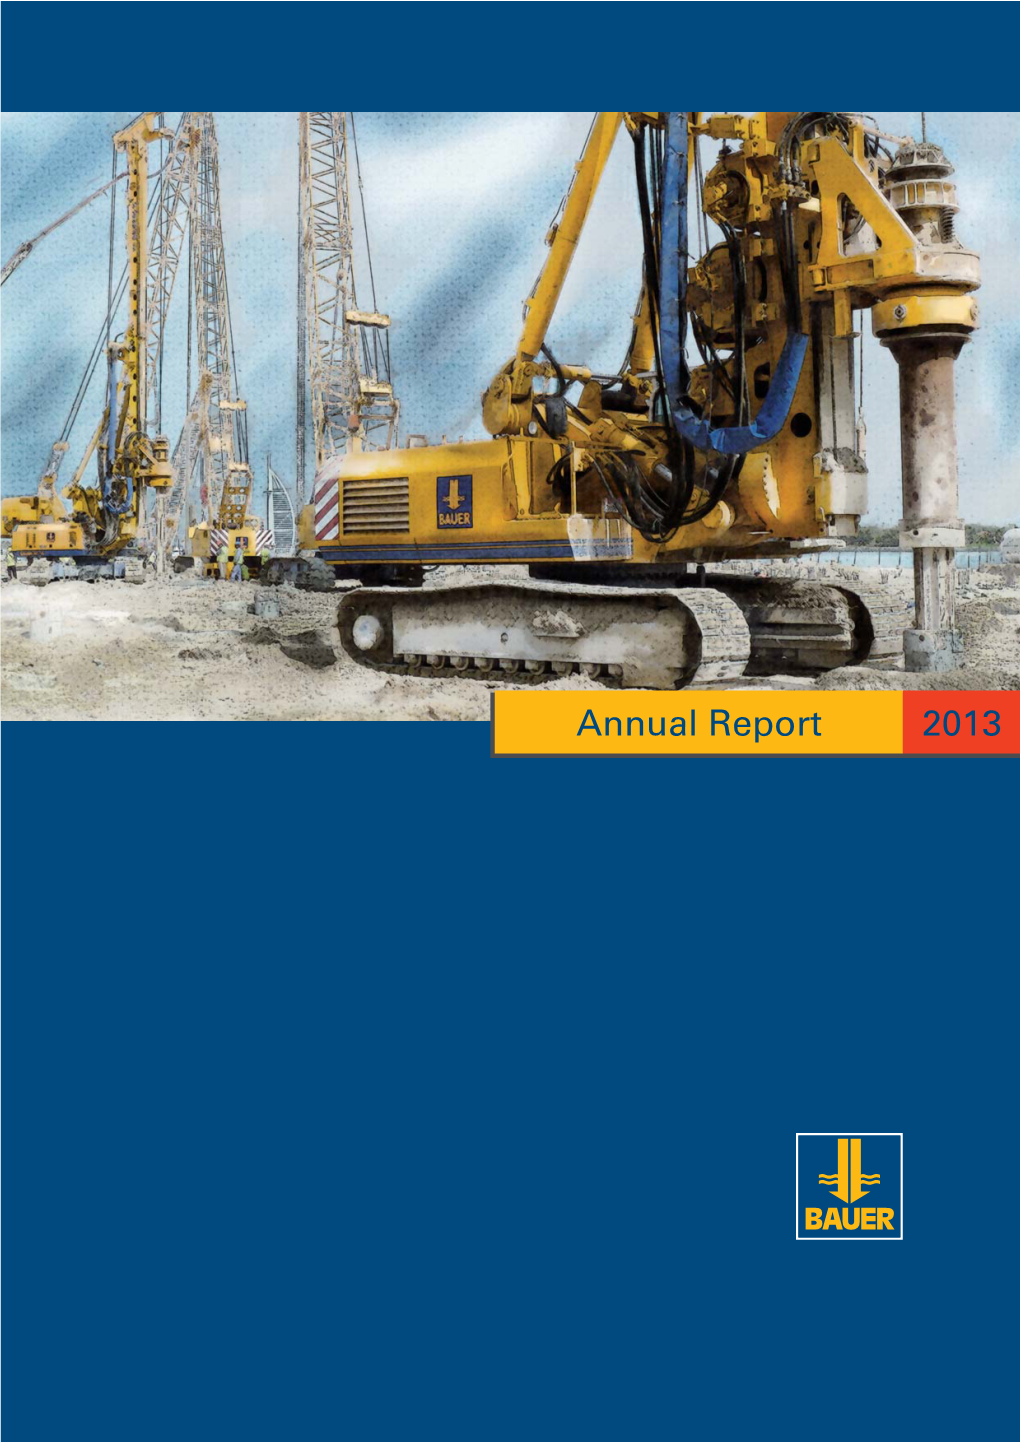 Annual Report 2013 the BAUER Group Is an International Construction and Machinery Manufacturing Concern Based in Schrobenhausen, Bavaria